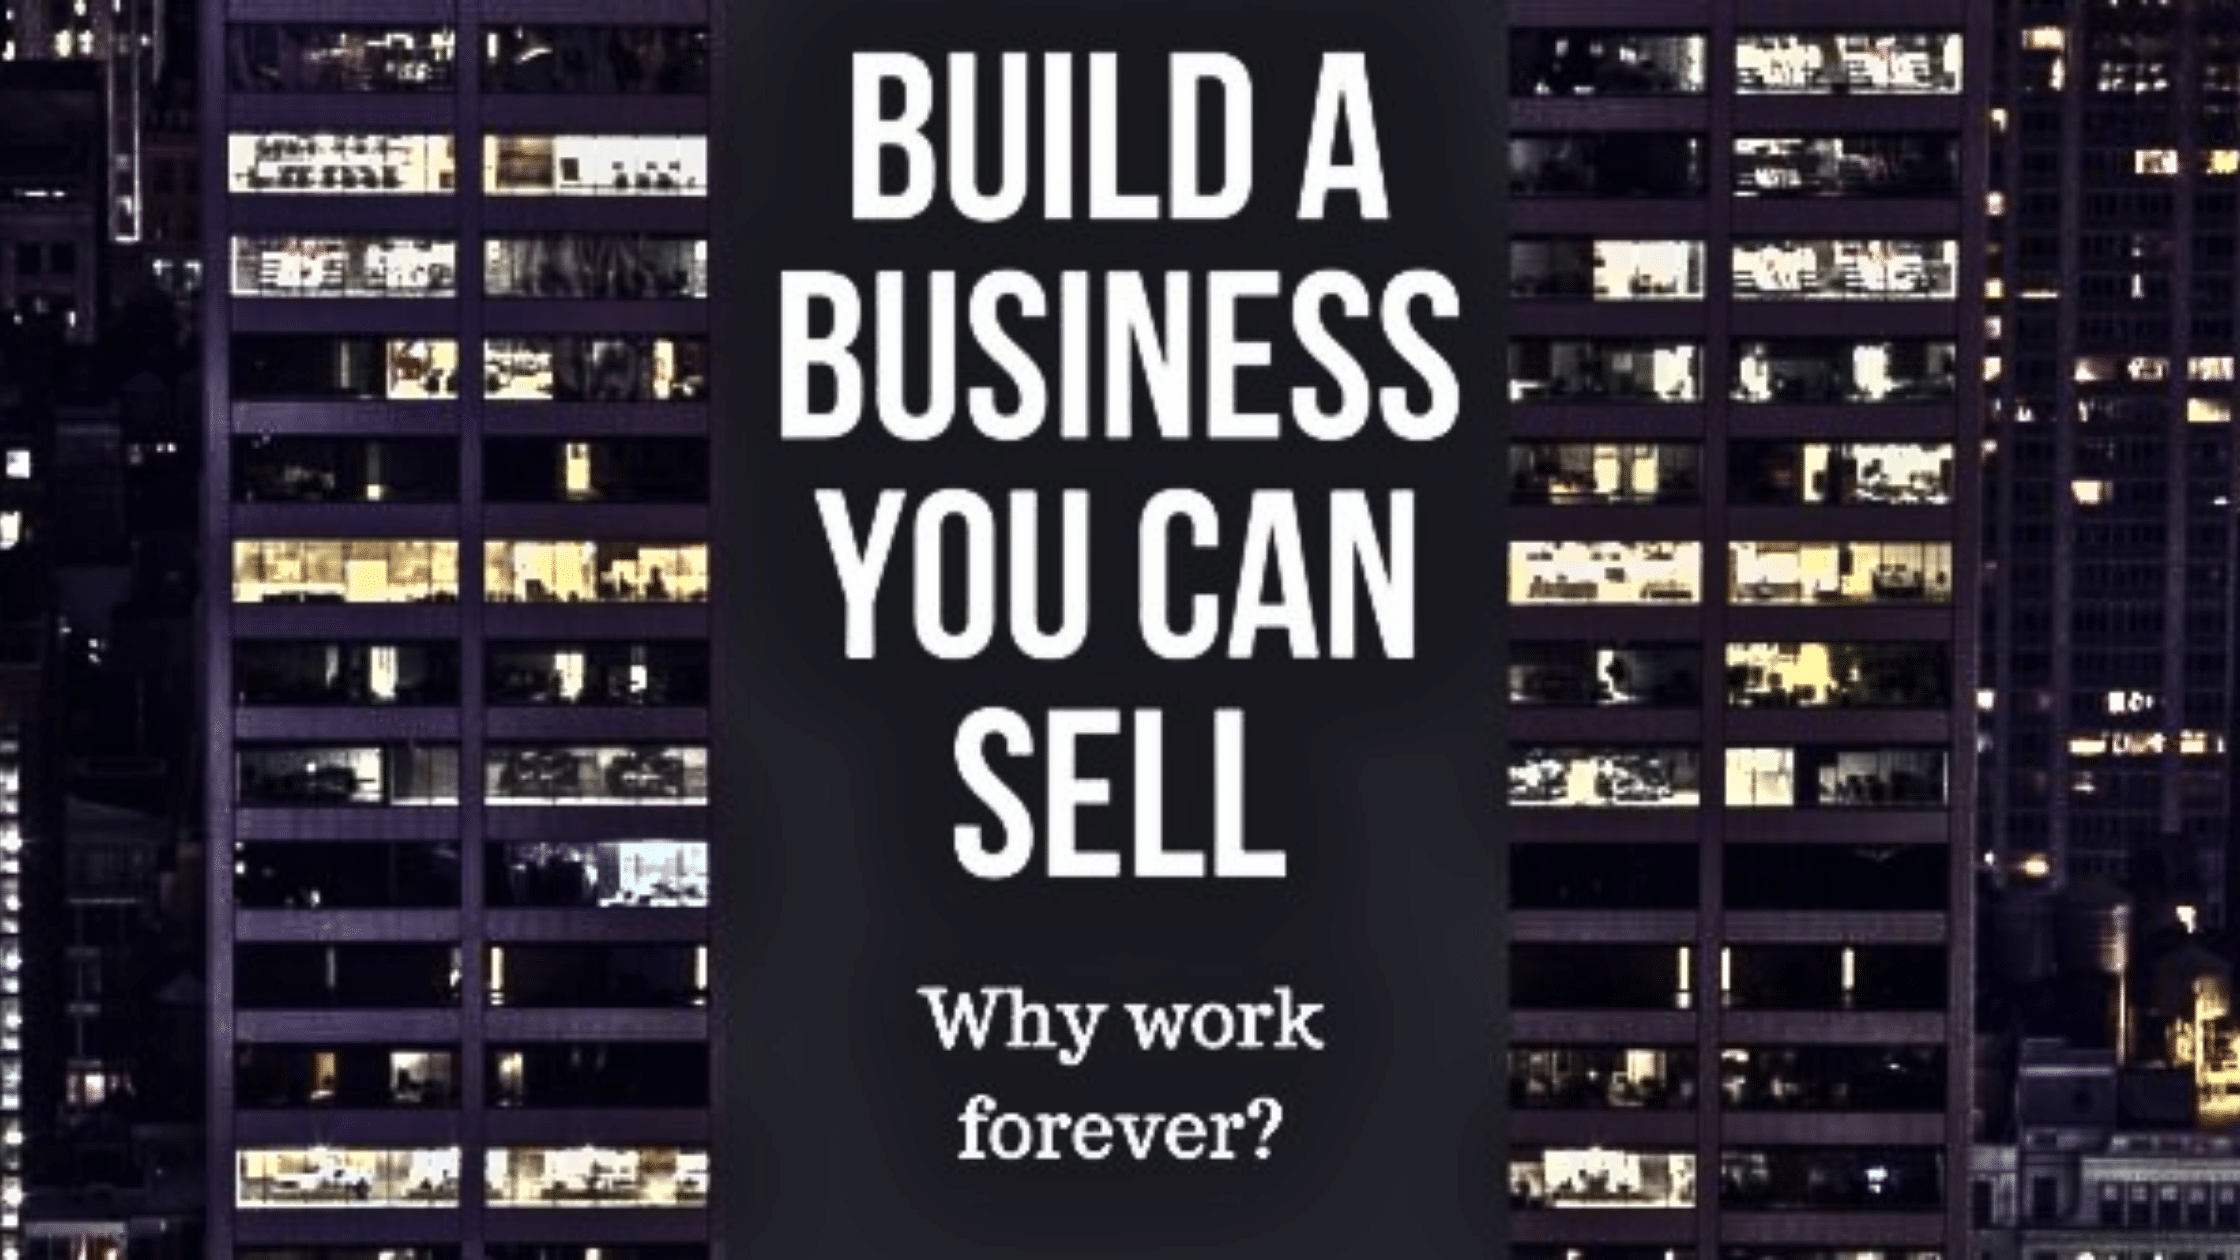 Building a Business You Can Sell